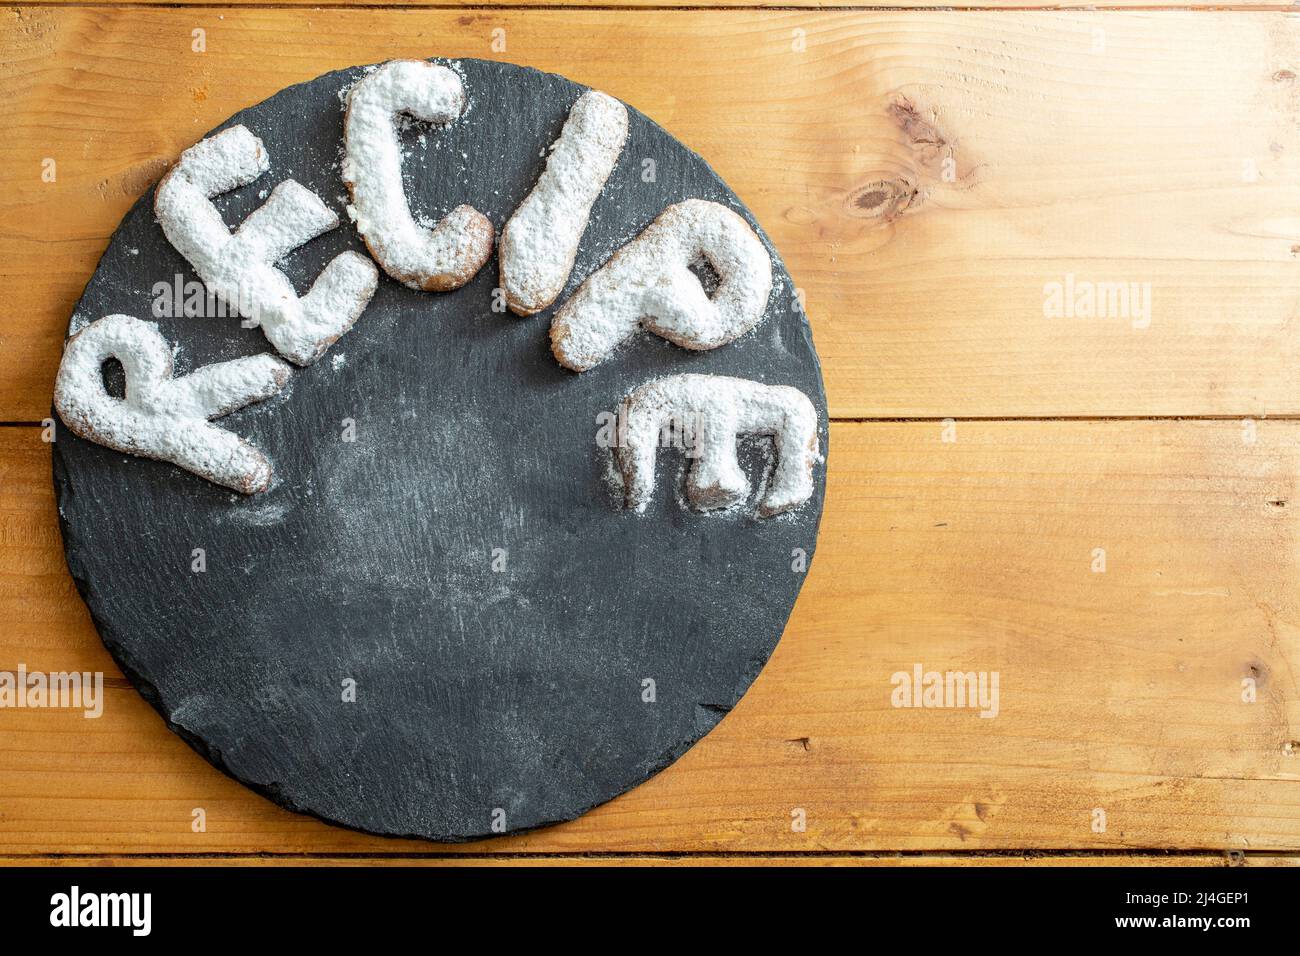 Recipe written with cookie letters on a black stone slab Stock Photo